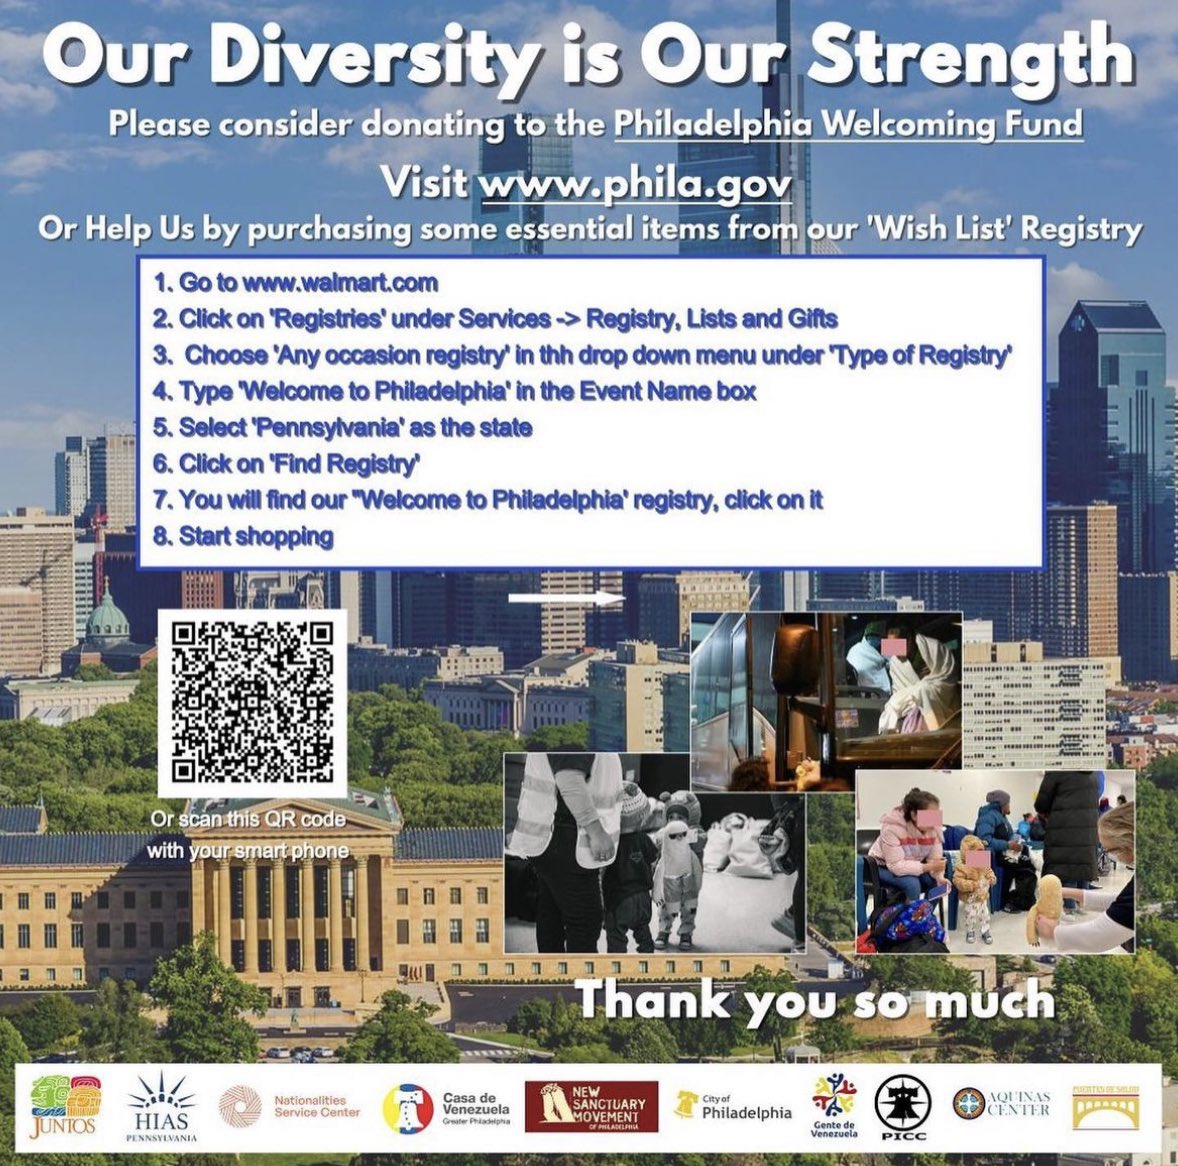 Every city should be a sanctuary city. Every person seeking asylum is worthy of assistance. Philadelphia’s diversity is our strength. Donate to the @PhiladelphiaGov Welcoming Fund today: phila.gov/2022-11-15-how…